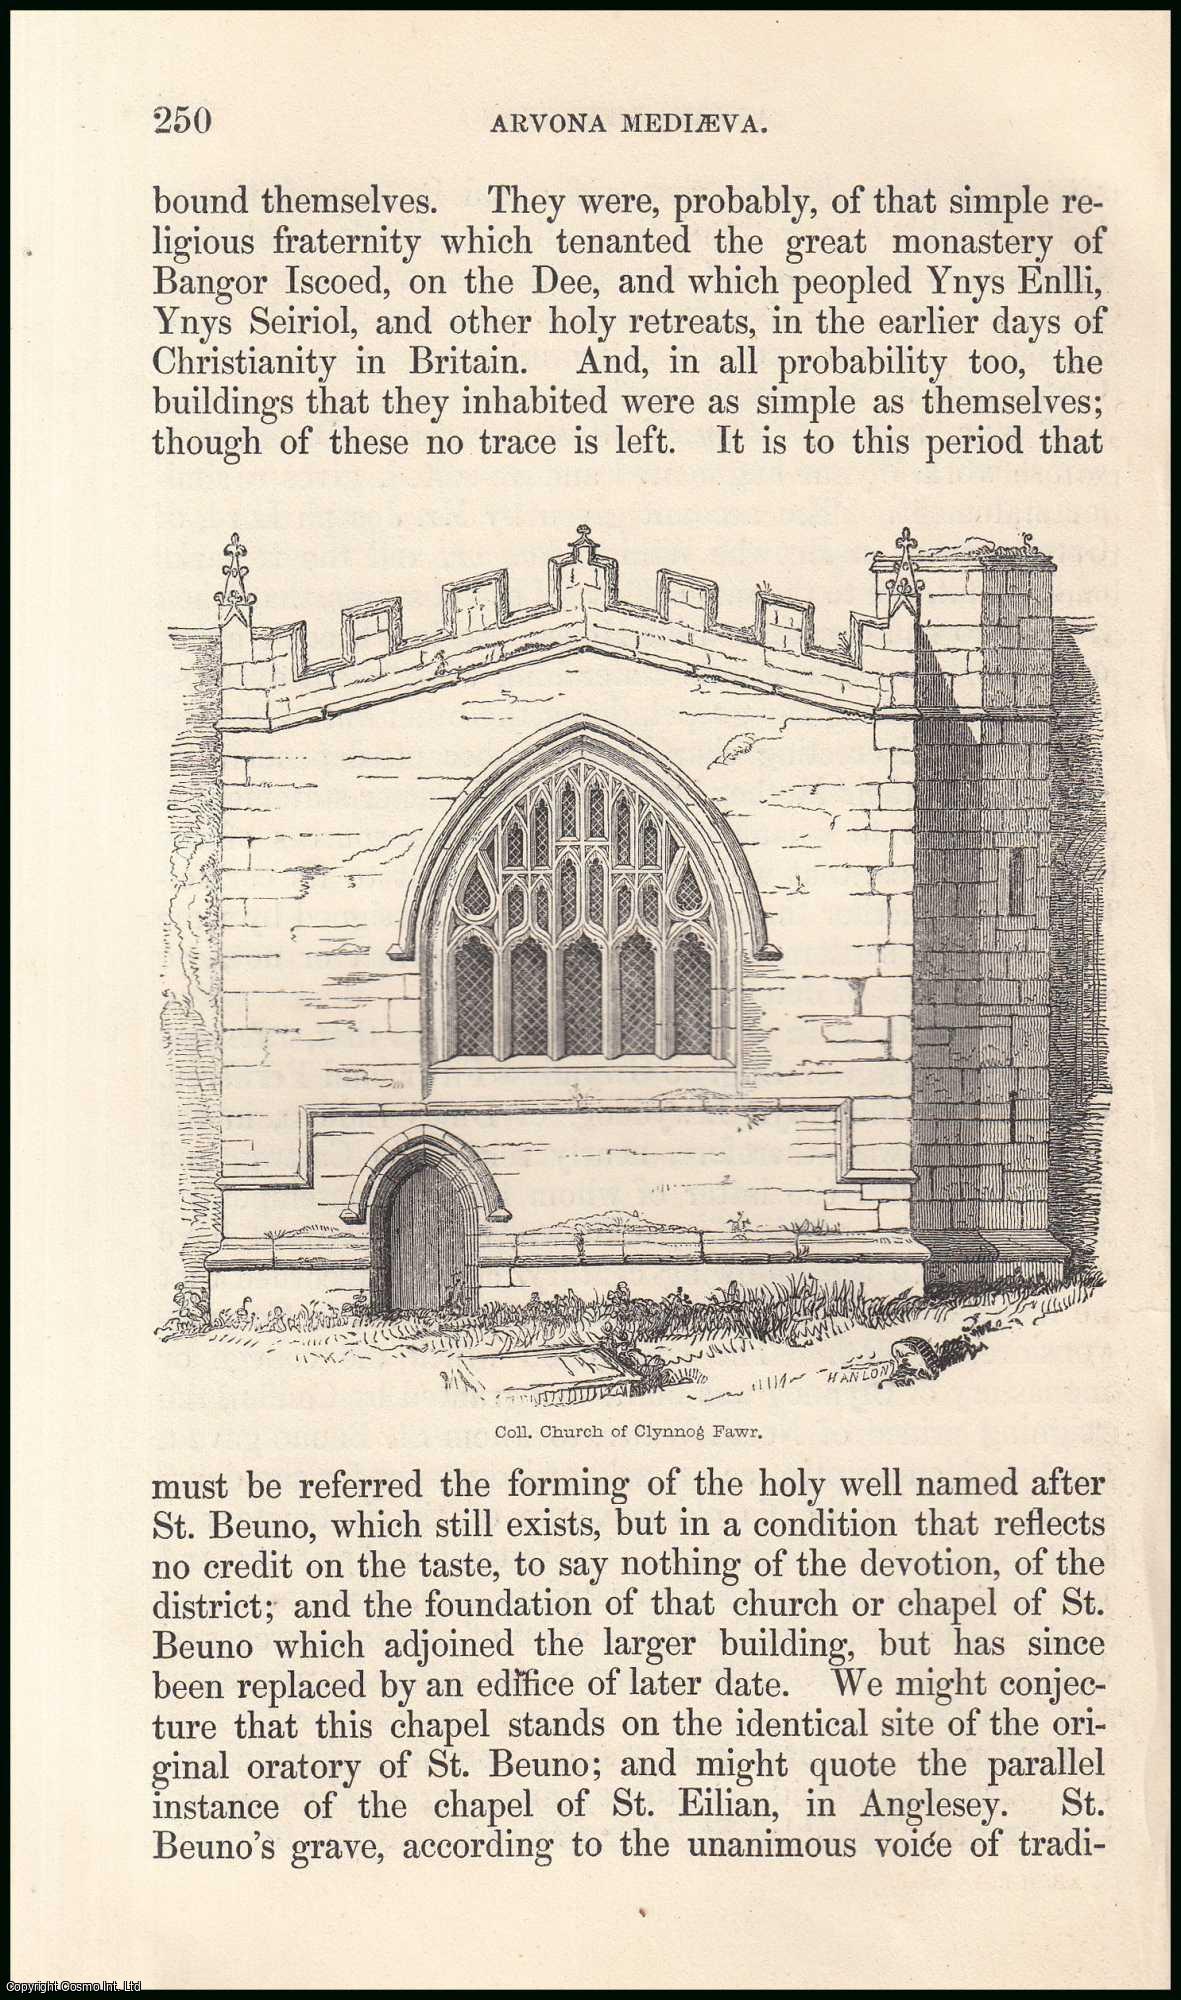 H.L.J. - Collegiate Church of Clynnog Fawr, Caernarvonshire. A complete 2 part original article from the Archaeologia Cambrensis, a Record of The Antiquities of Wales & its Marches, 1848.